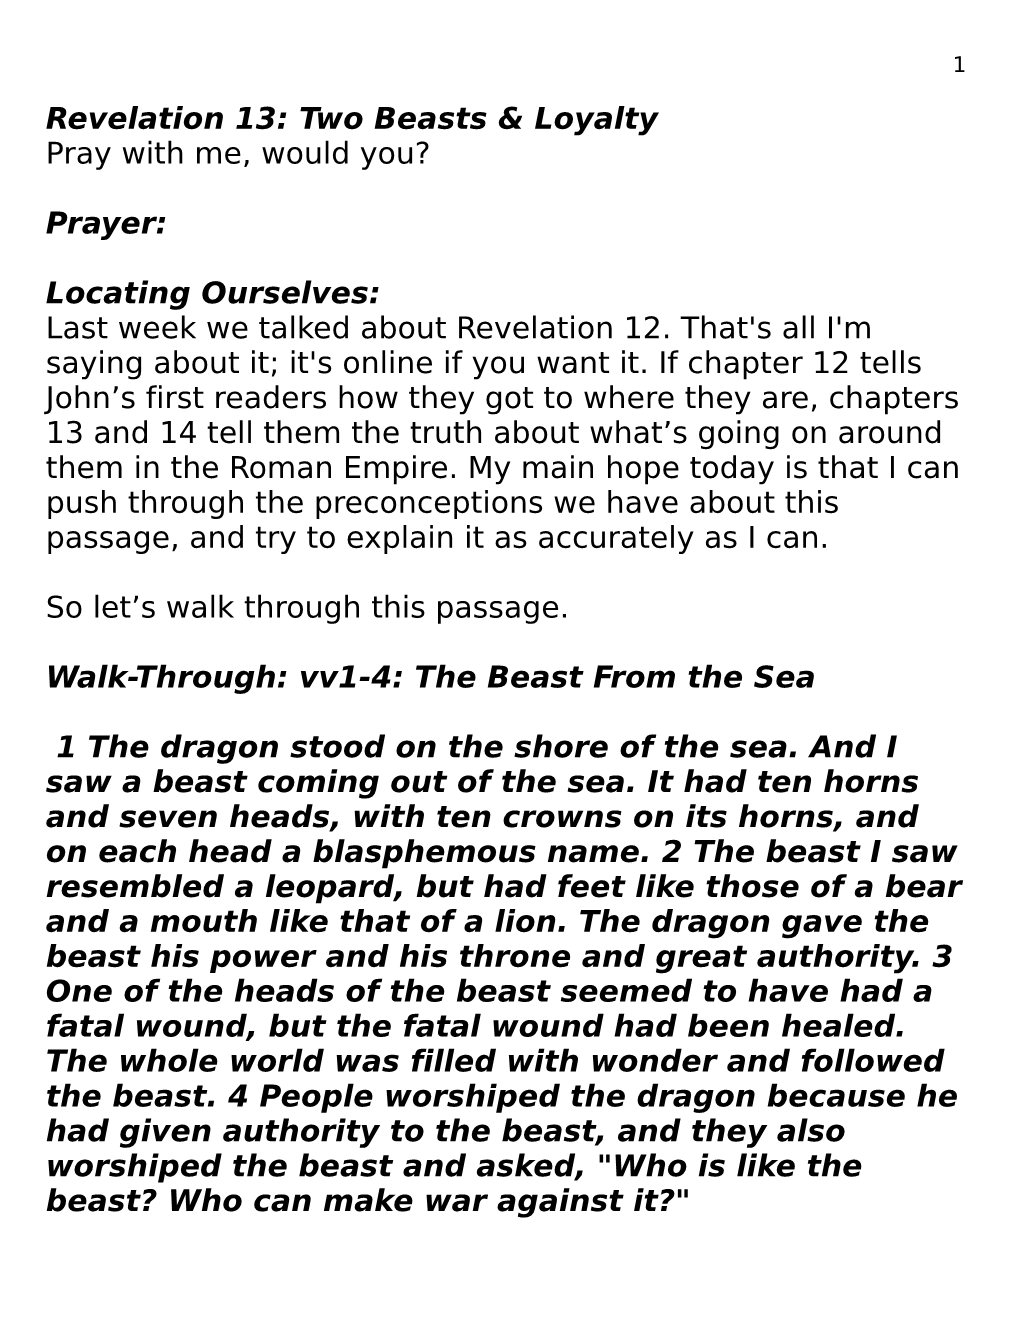 Revelation 13: Two Beasts & Loyalty Pray with Me, Would You?